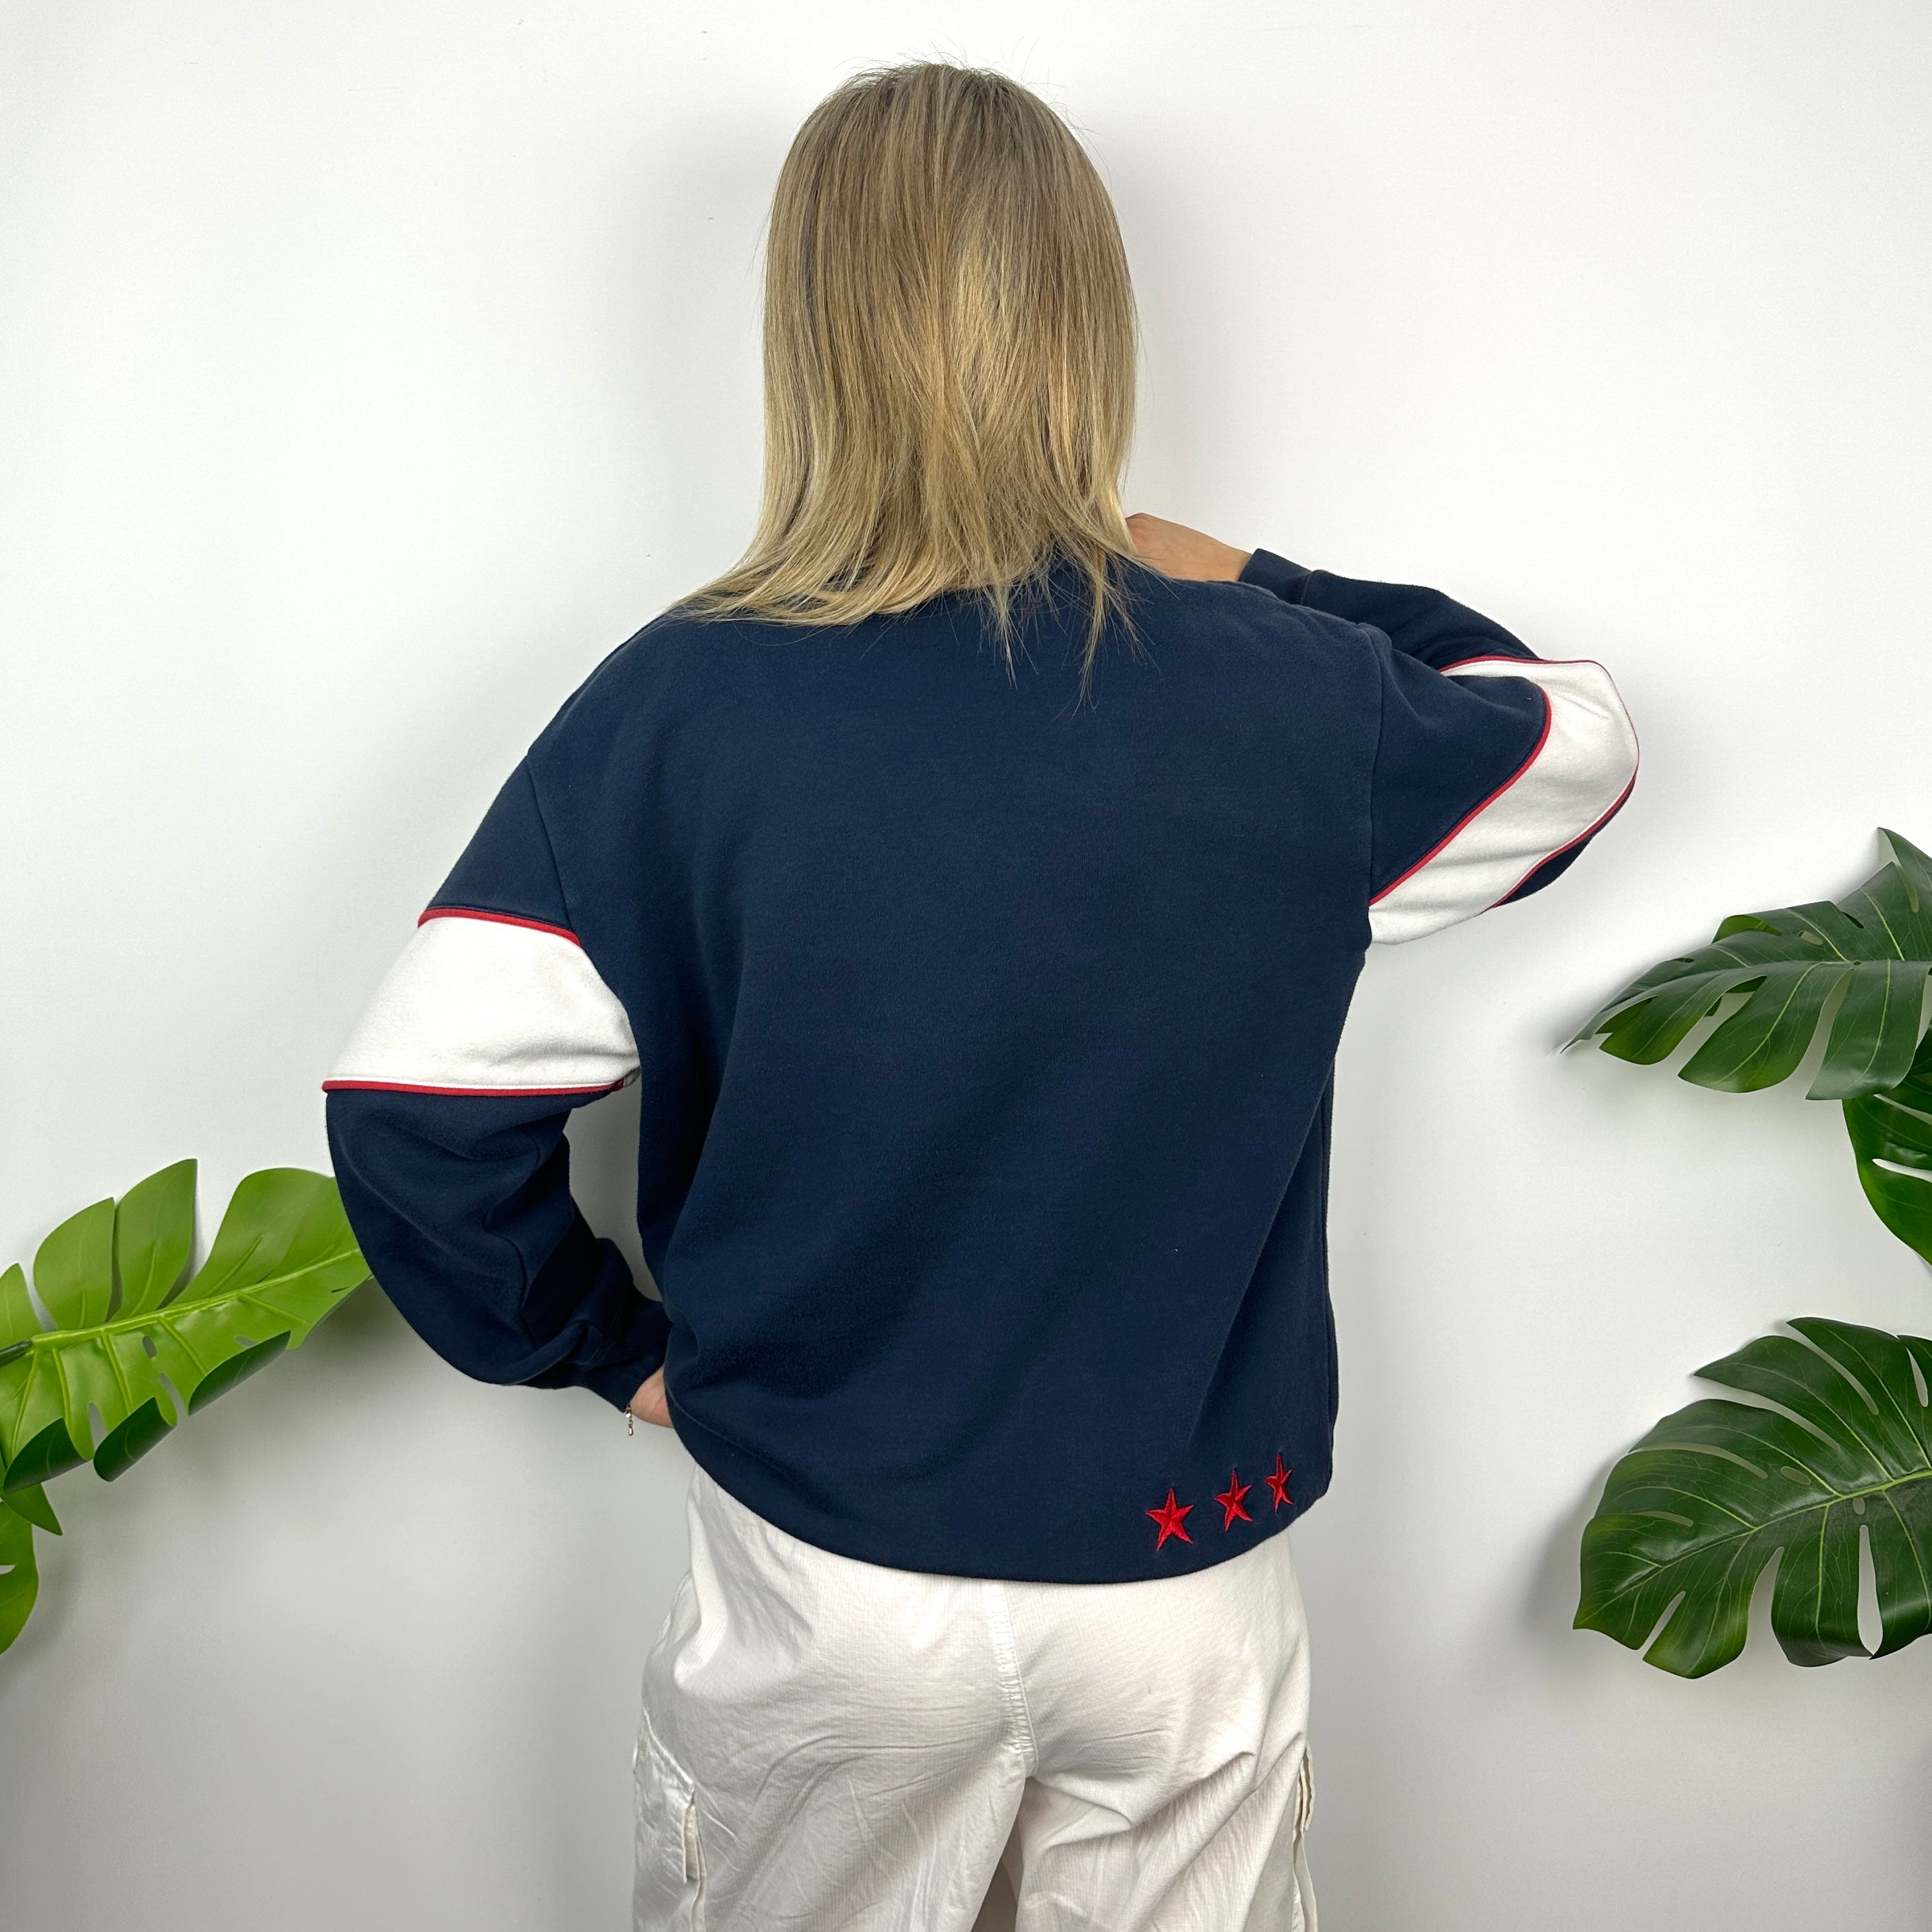 Nike Cortez Navy Embroidered Spell Out Sweatshirt (M)